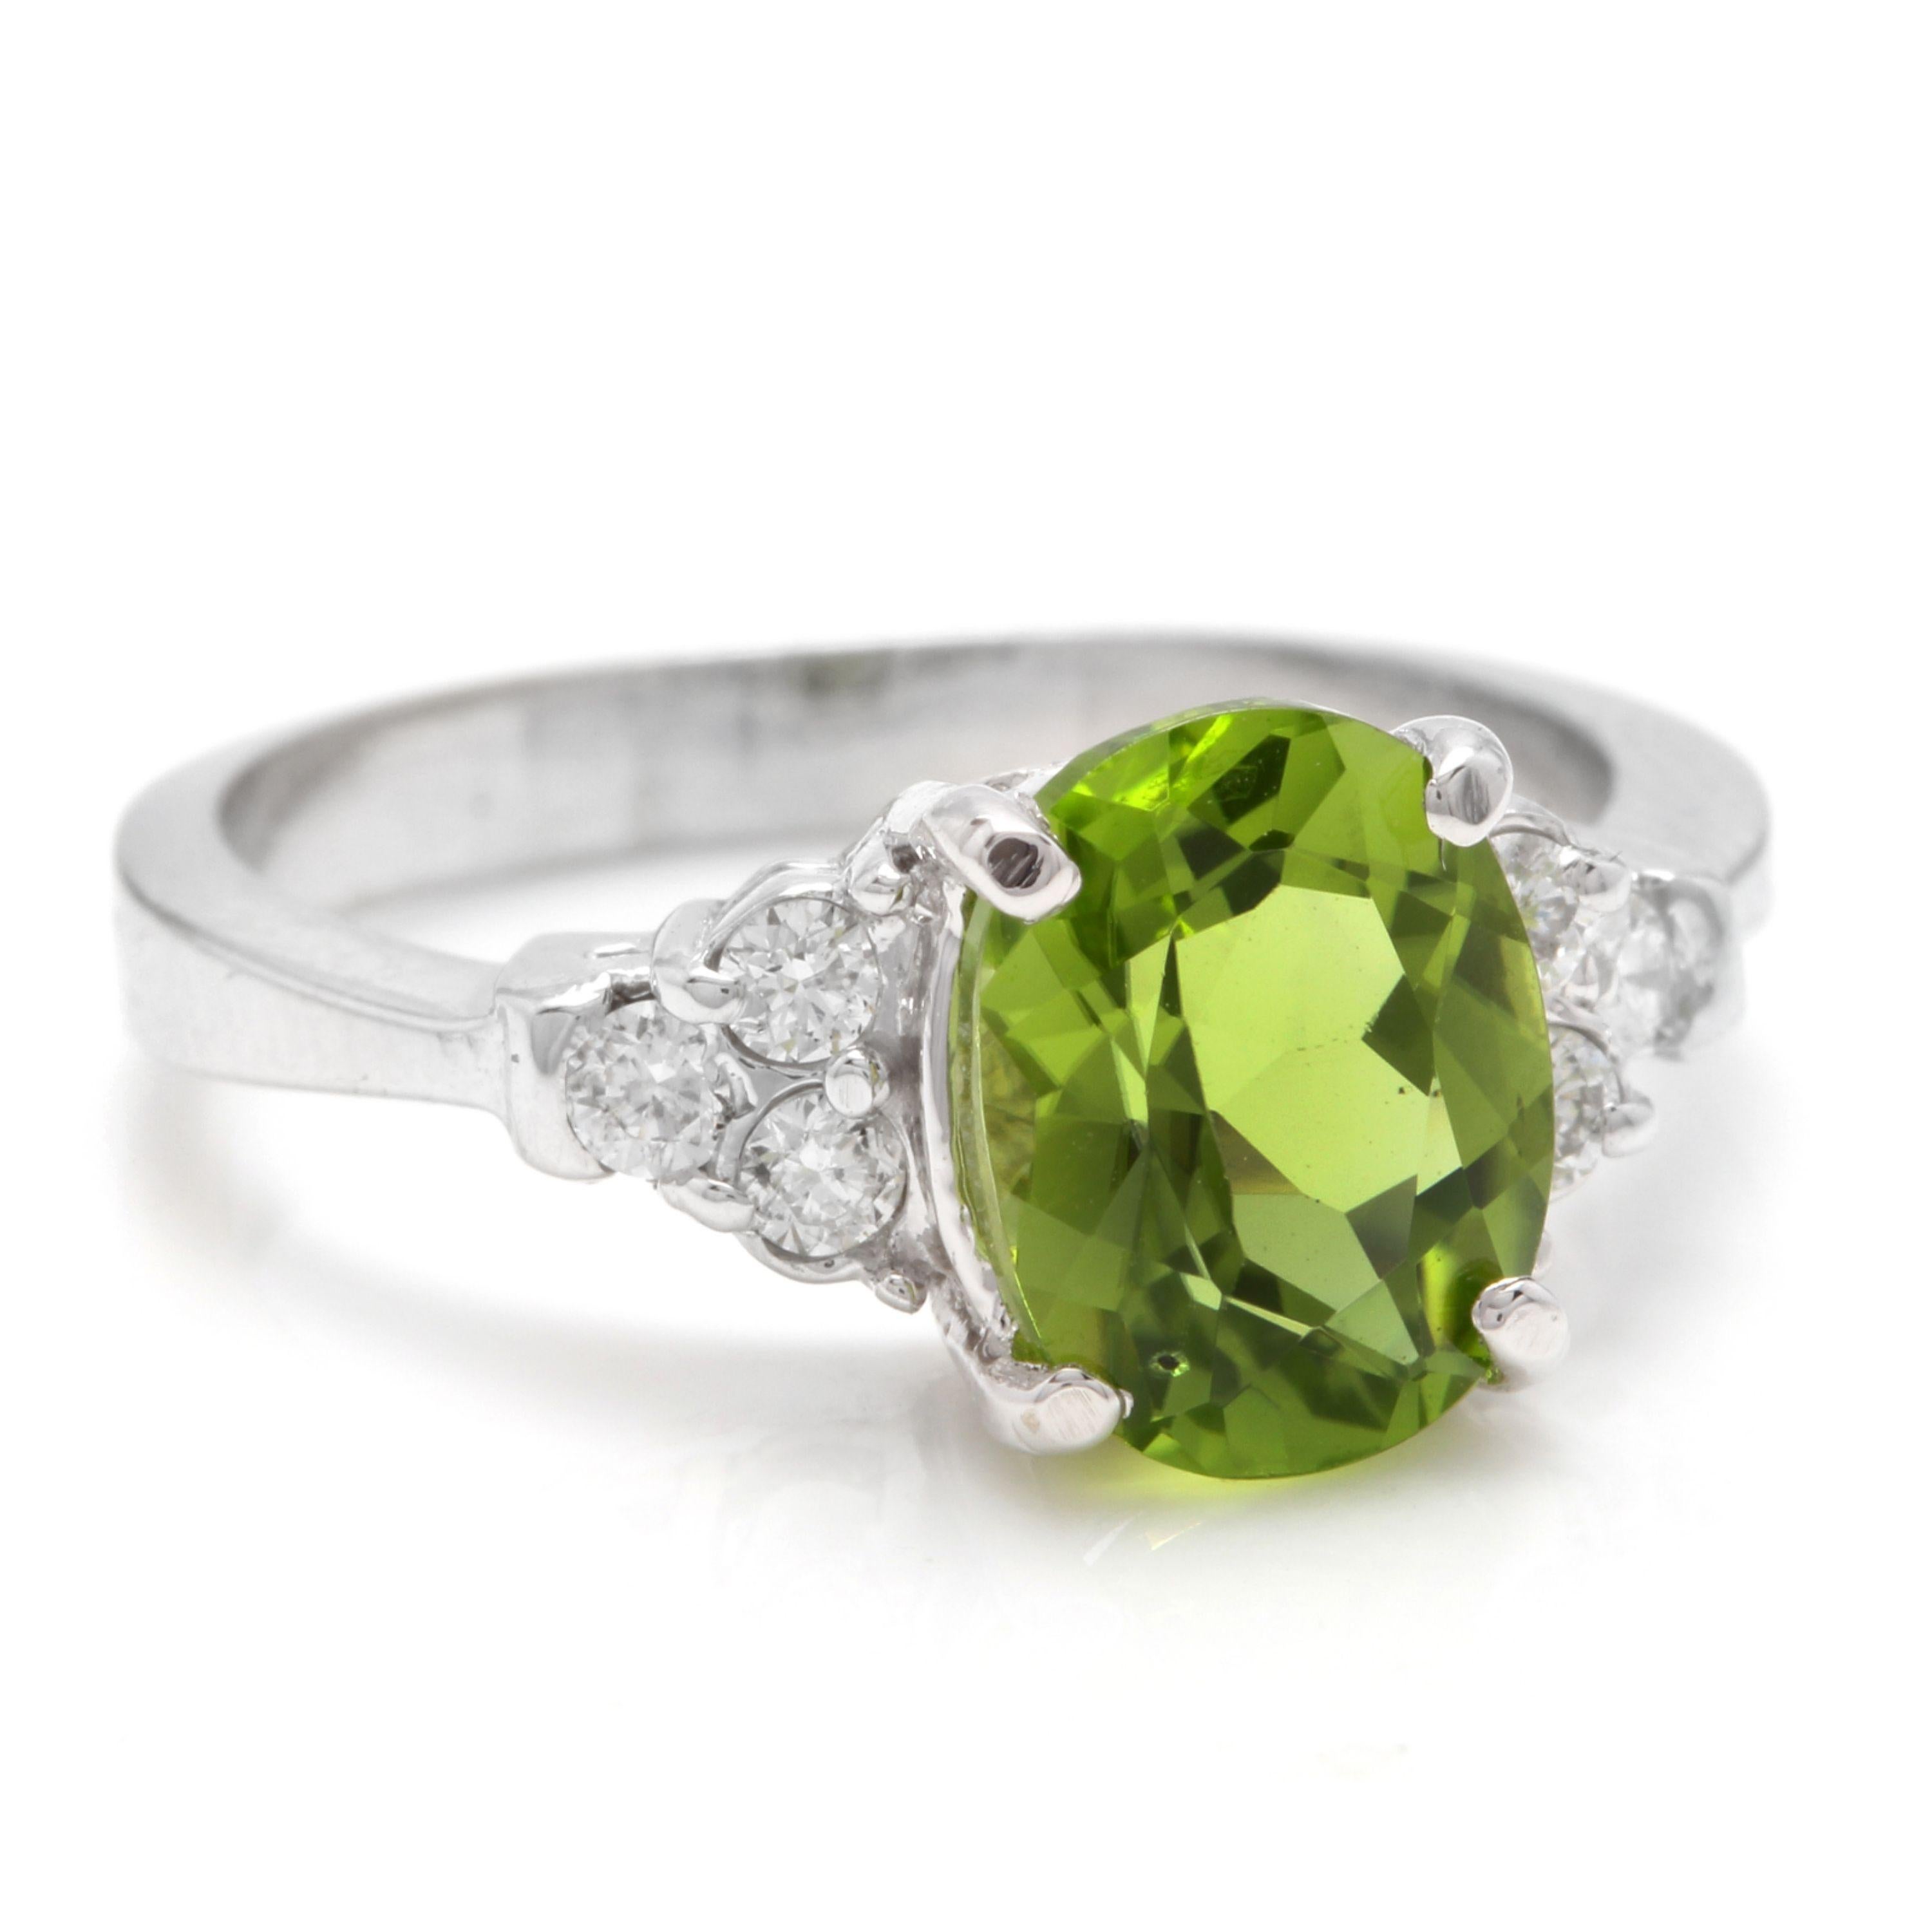 2.70 Carats Natural Very Nice Looking Peridot and Diamond 14K Solid White Gold Ring

Total Natural Oval Peridot Weight is: Approx. 2.50 Carats

Peridot Measures: Approx. 9.00 x 7.00mm

Natural Round Diamonds Weight: Approx. 0.20 Carats (color G-H /